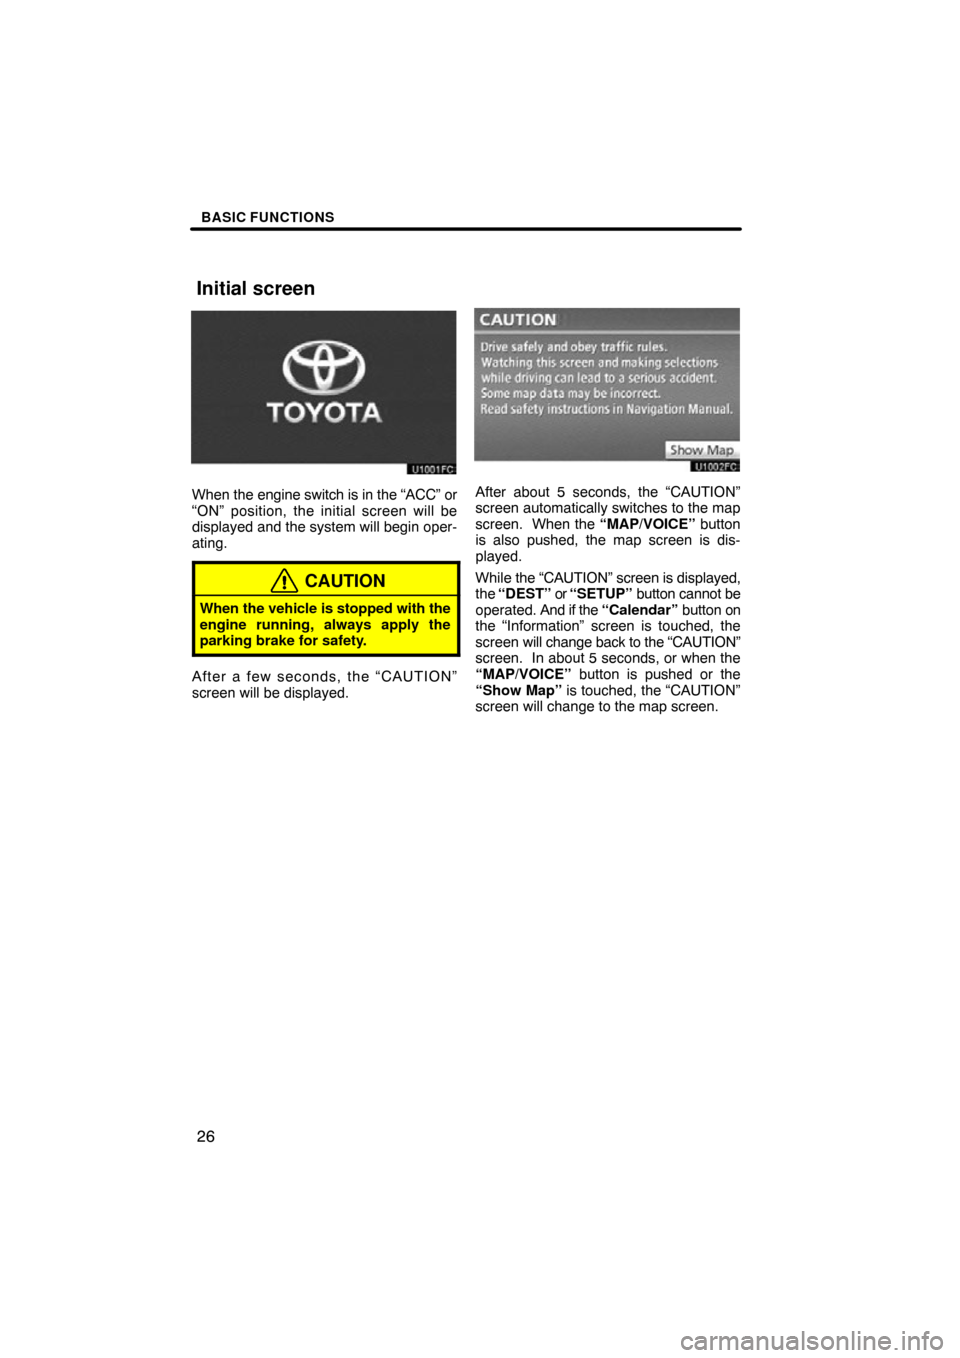 TOYOTA TUNDRA 2012 2.G Navigation Manual BASIC FUNCTIONS
26
When the engine switch is in the “ACC” or
“ON” position, the initial screen will be
displayed and the system will begin oper-
ating.
CAUTION
When the vehicle  is stopped wit